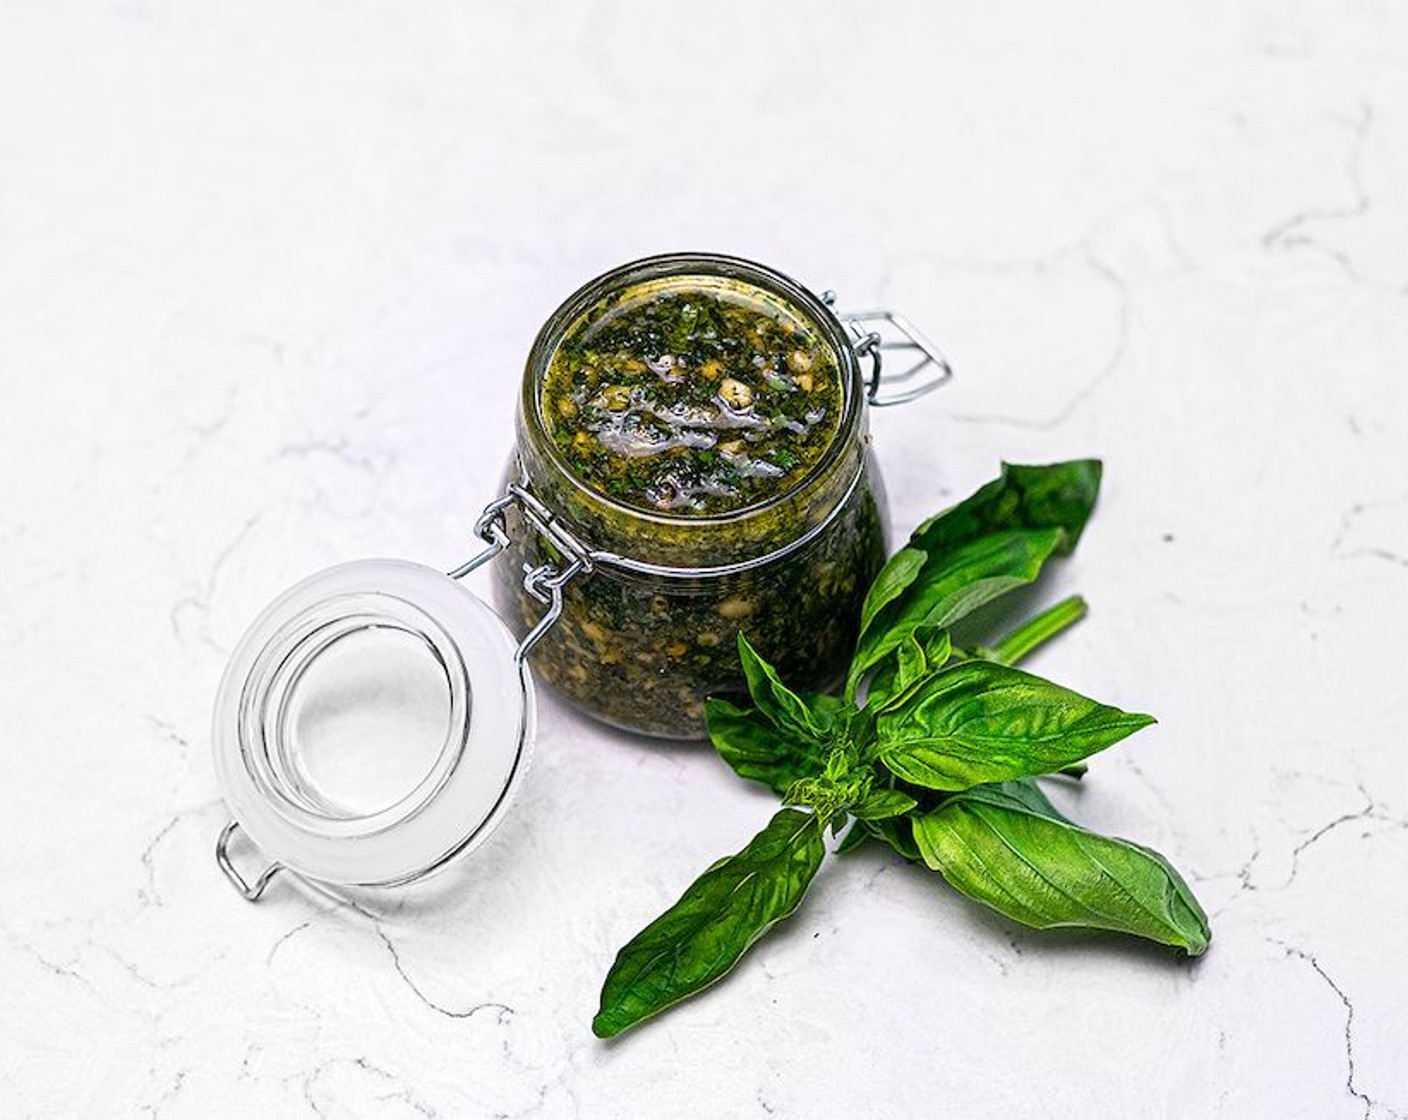 step 5 Store Pesto Alla Genovese in an airtight container. Before you seal it, cover the top of the pesto with a layer of oil to help preserve its freshness.